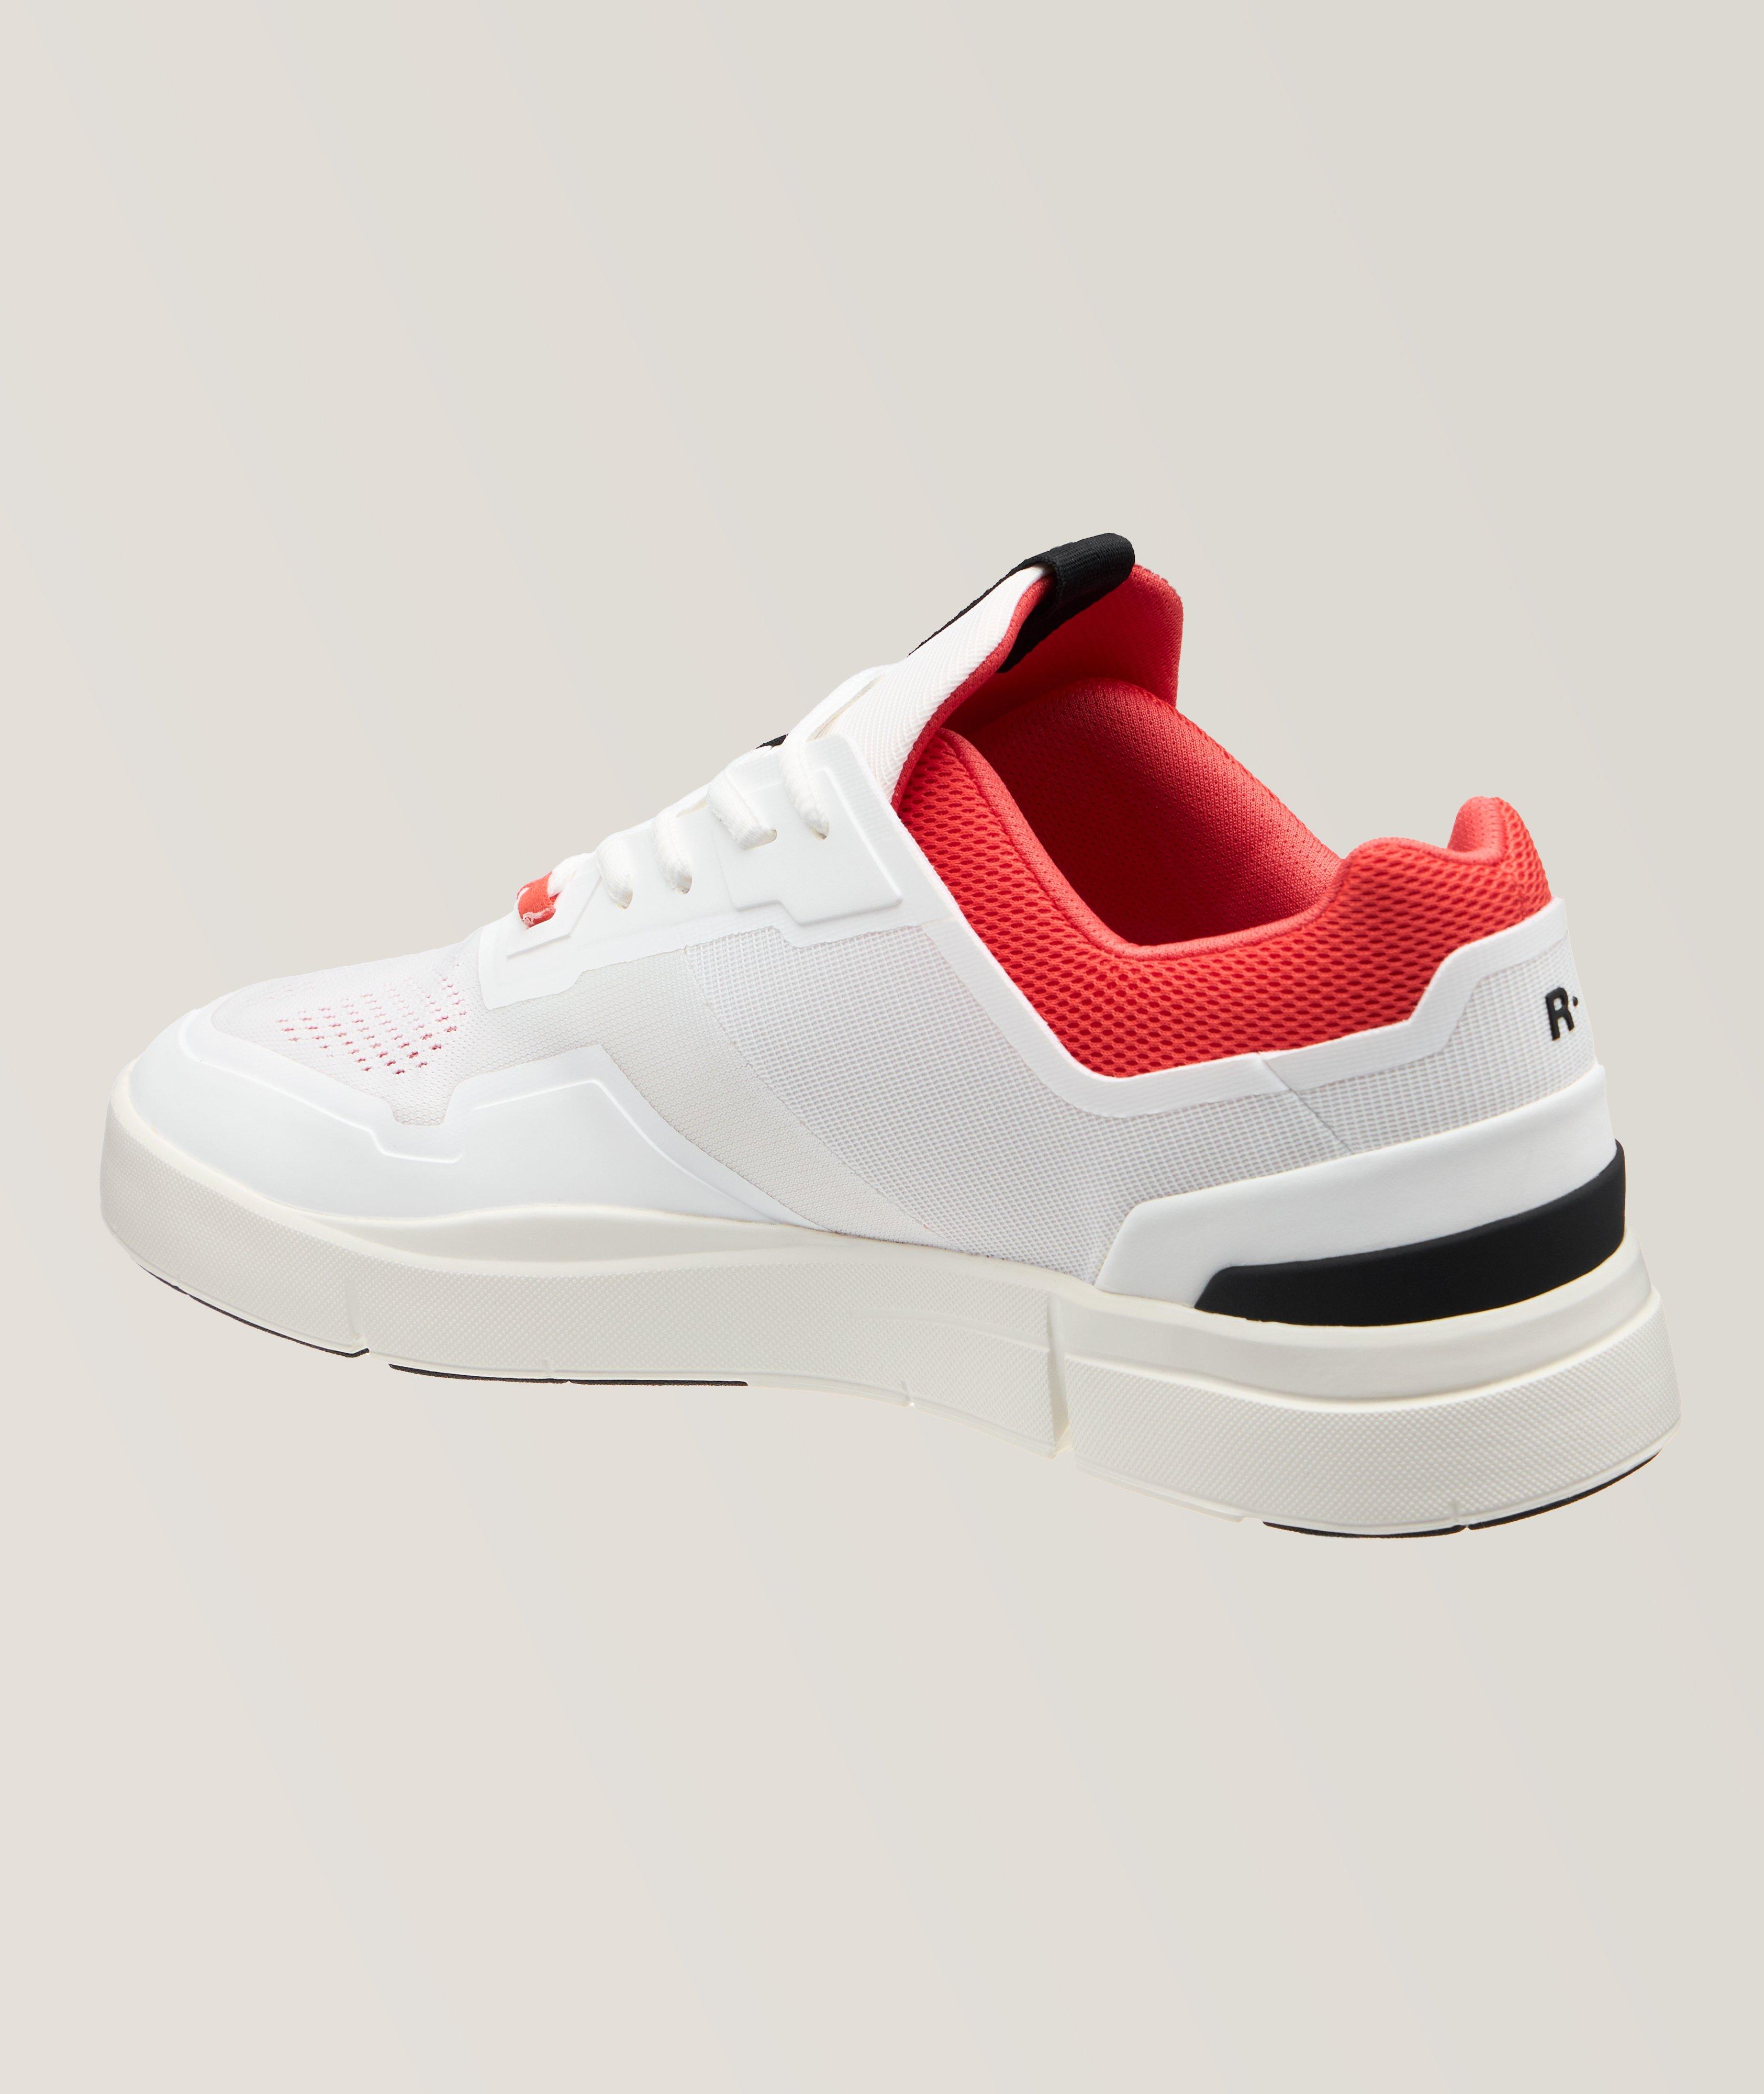 Chaussure sport The Roger Spin en tricot image 1